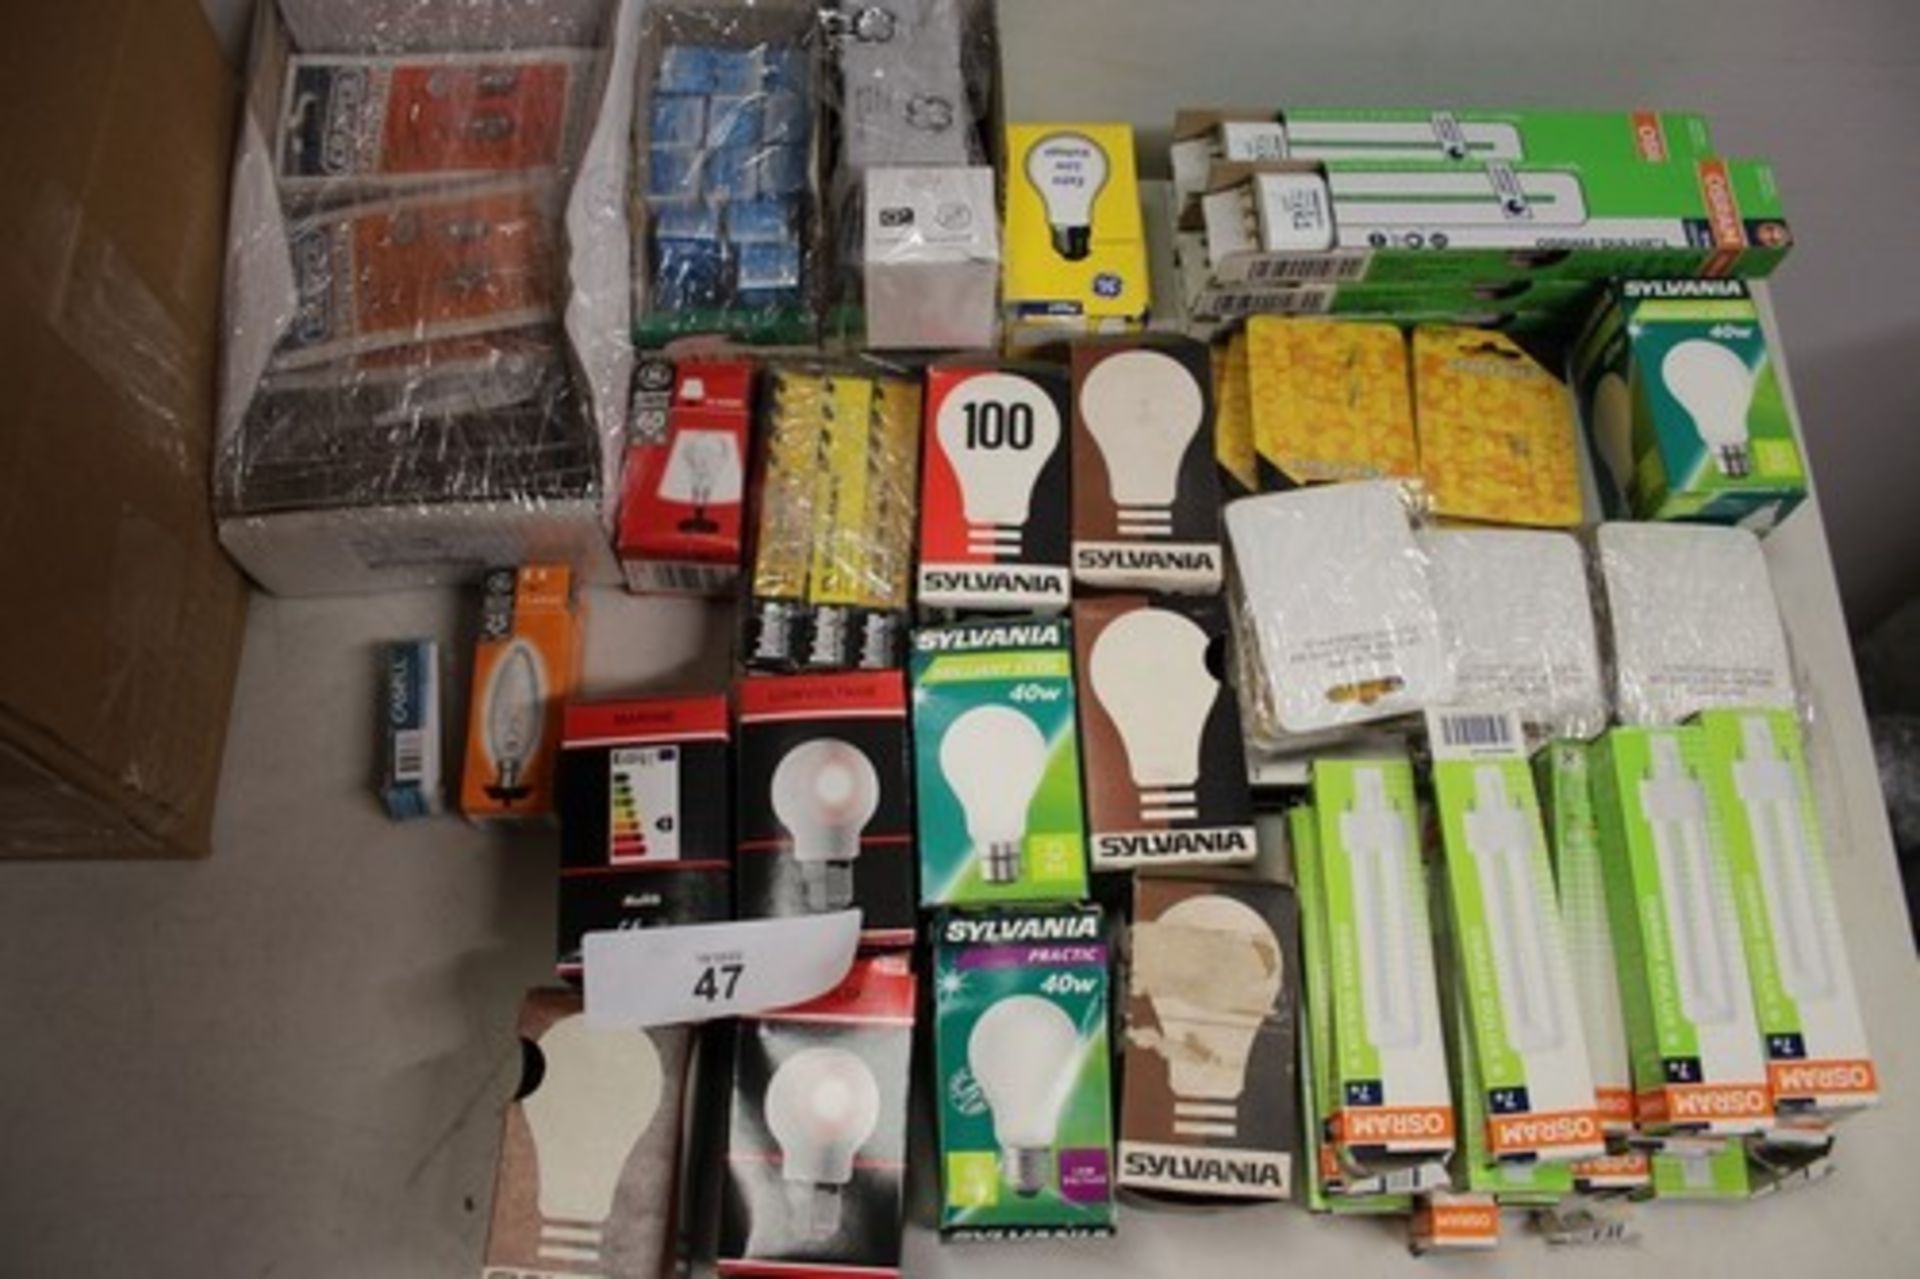 A selection of filament light bulbs including Sylvania, Philips, GE, Crompton, etc. in various sizes